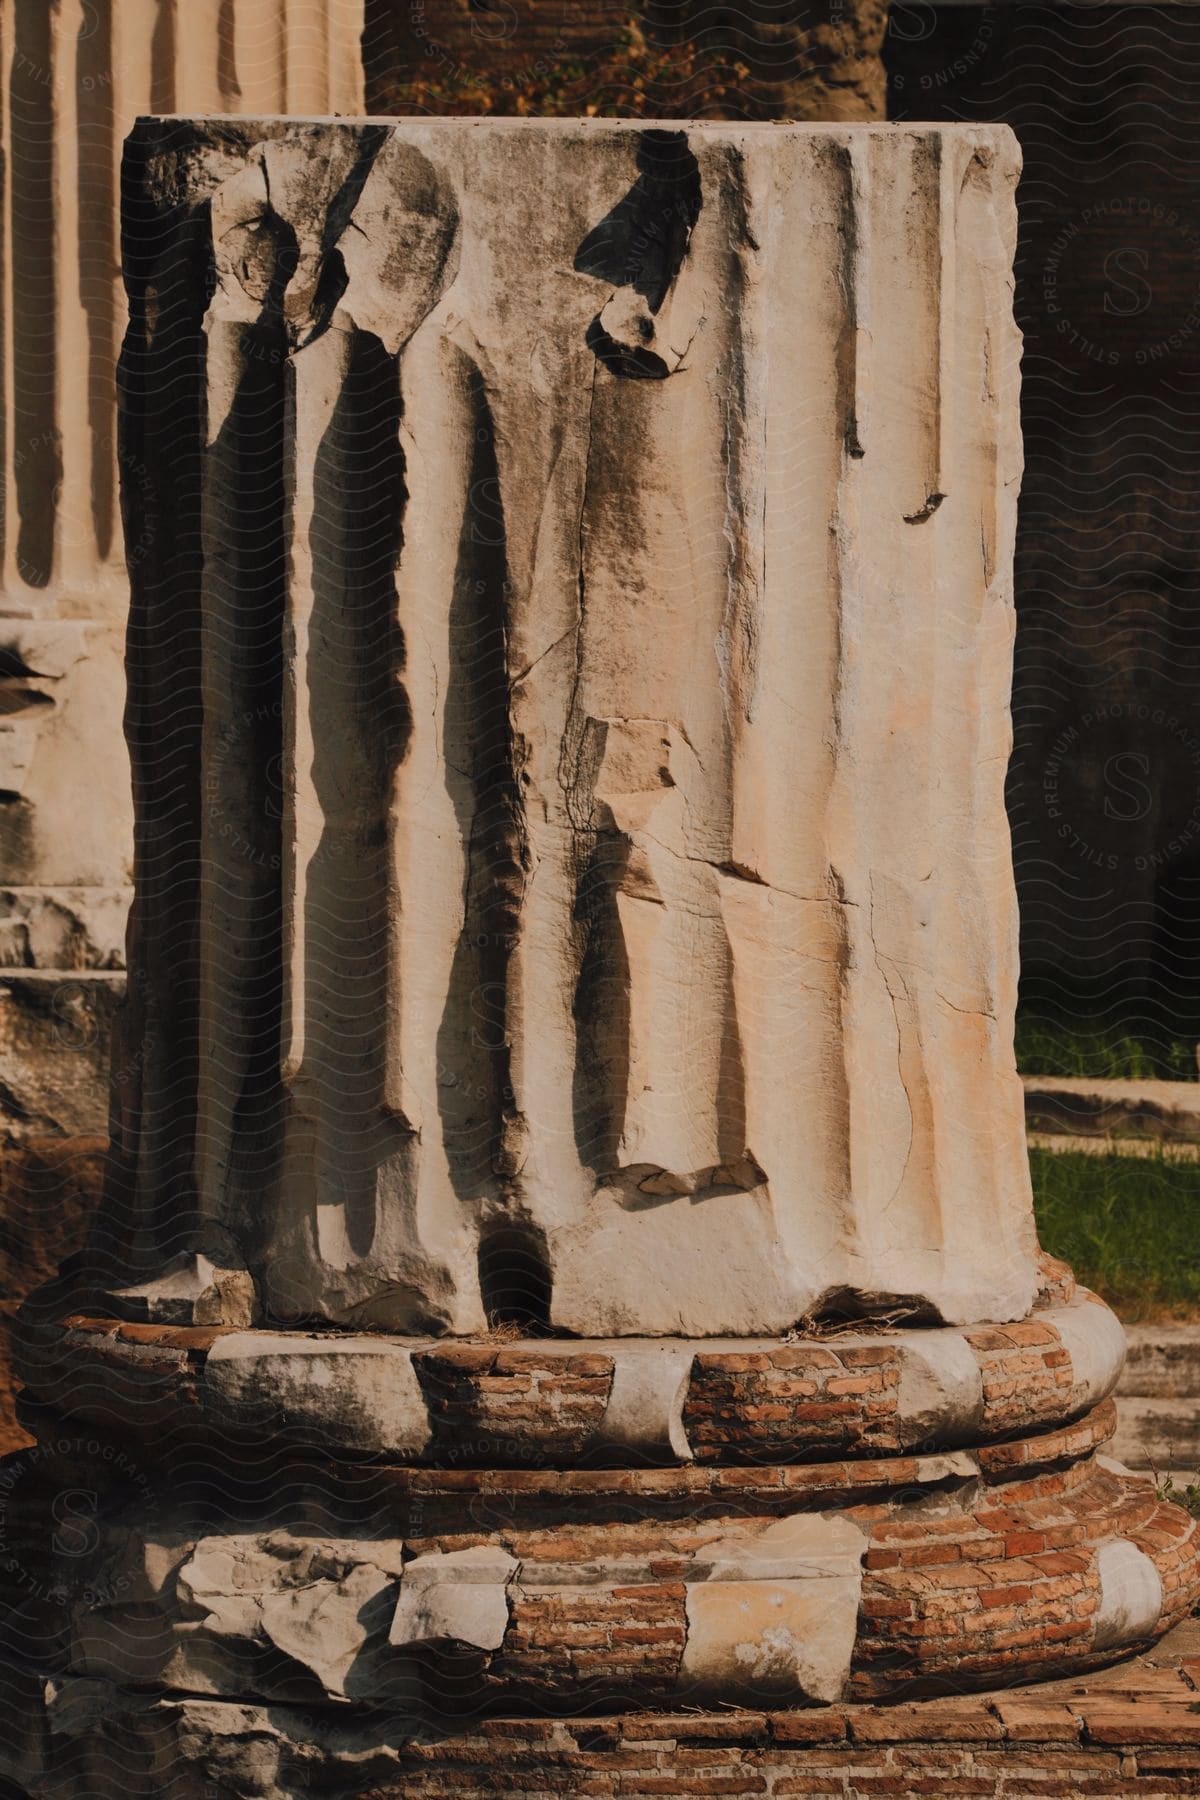 An ancient, weathered half-column showing signs of wear.